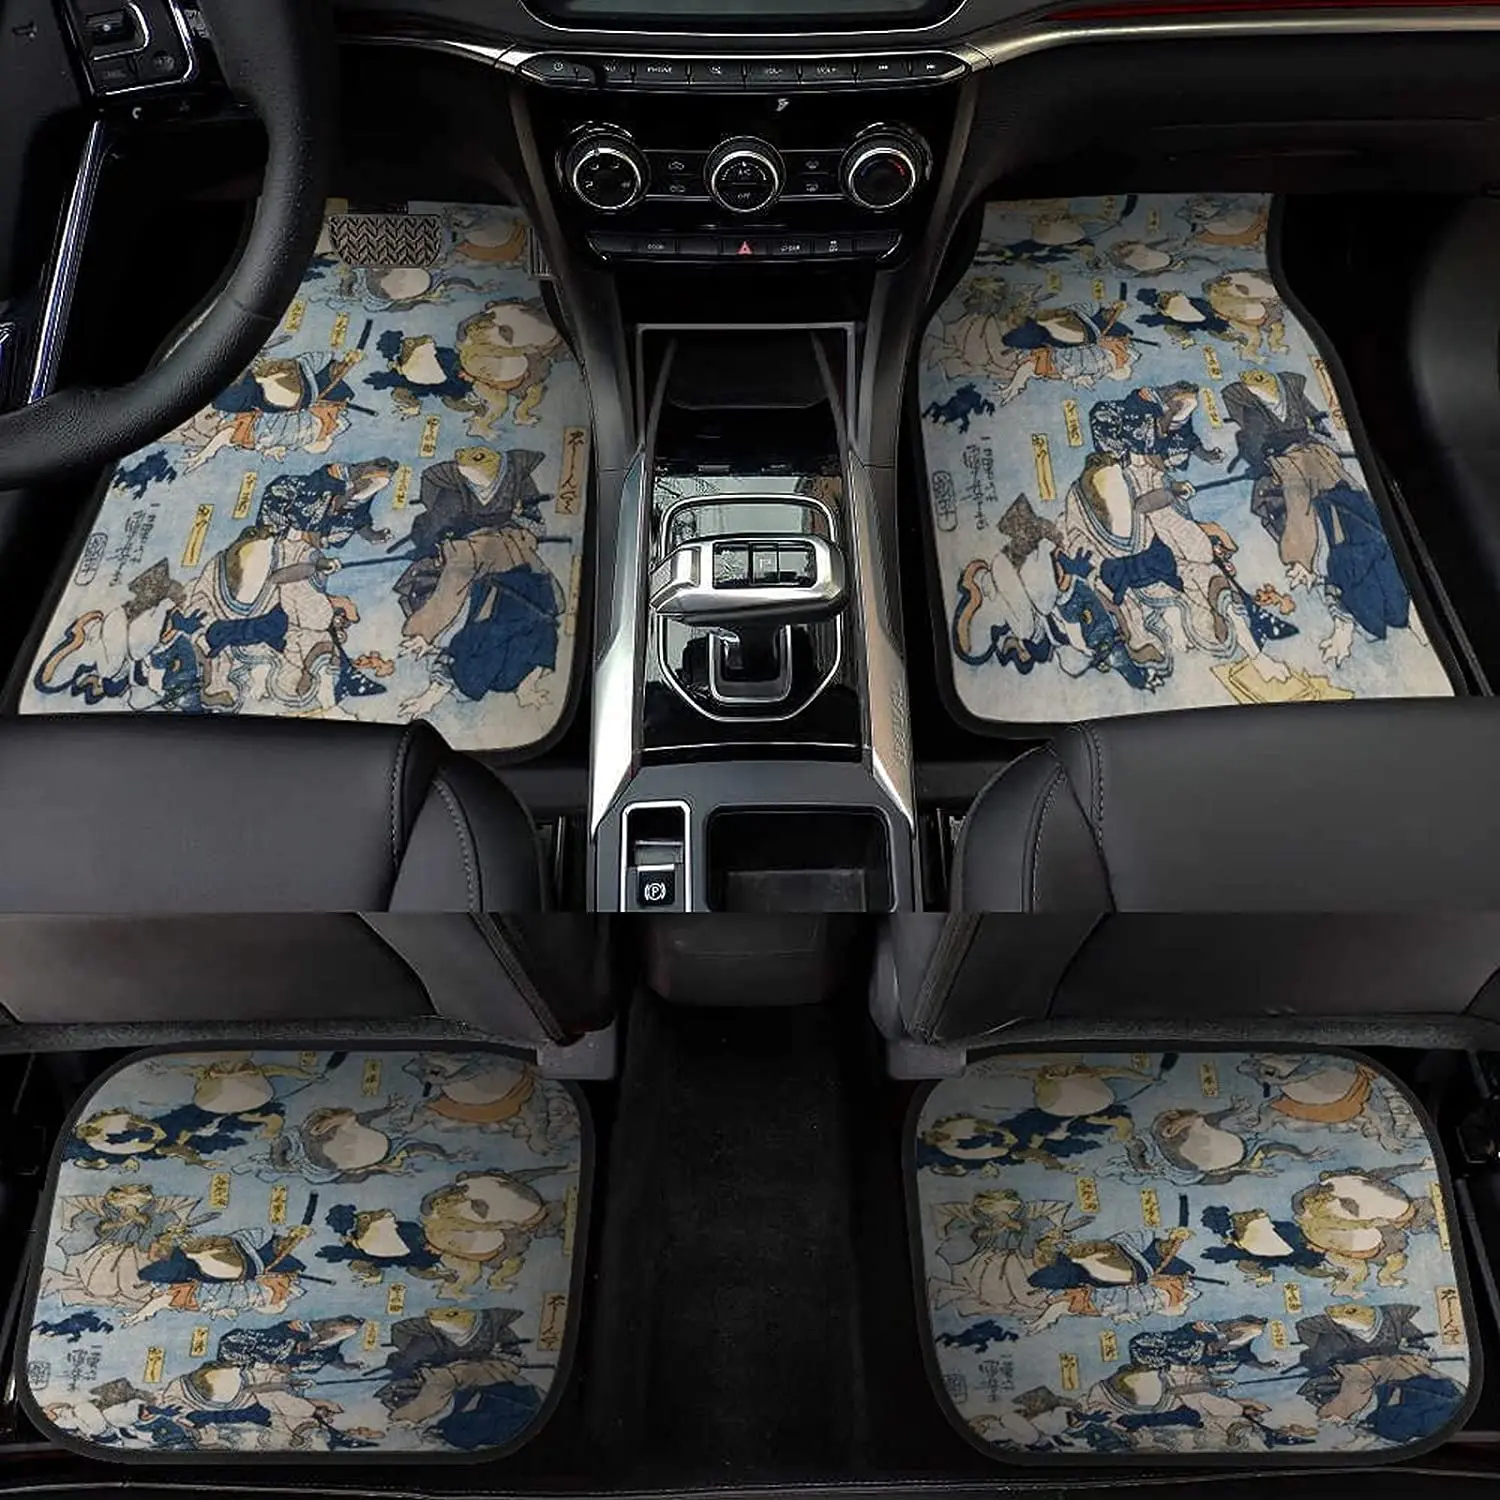 Famous Heroes of The Kabuki Stage Played by Frogs Car Mats Front&Rear 4-Piece Full Set Carpet Car SUV Truck Floor Mats with Non